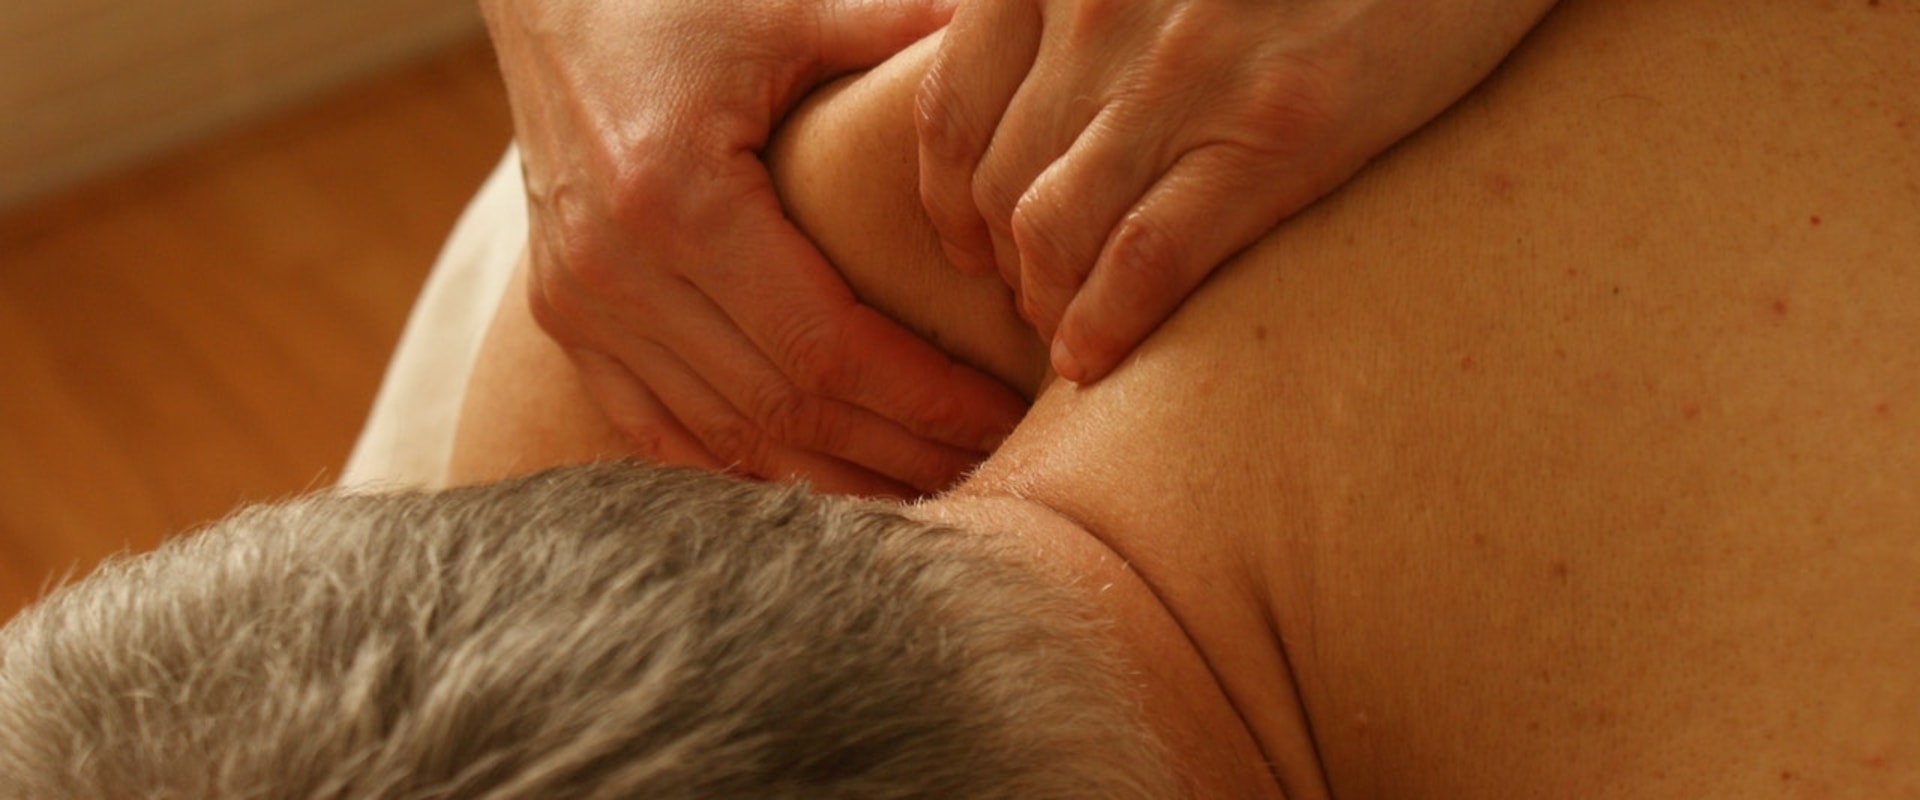 What should you not do after a deep tissue massage?